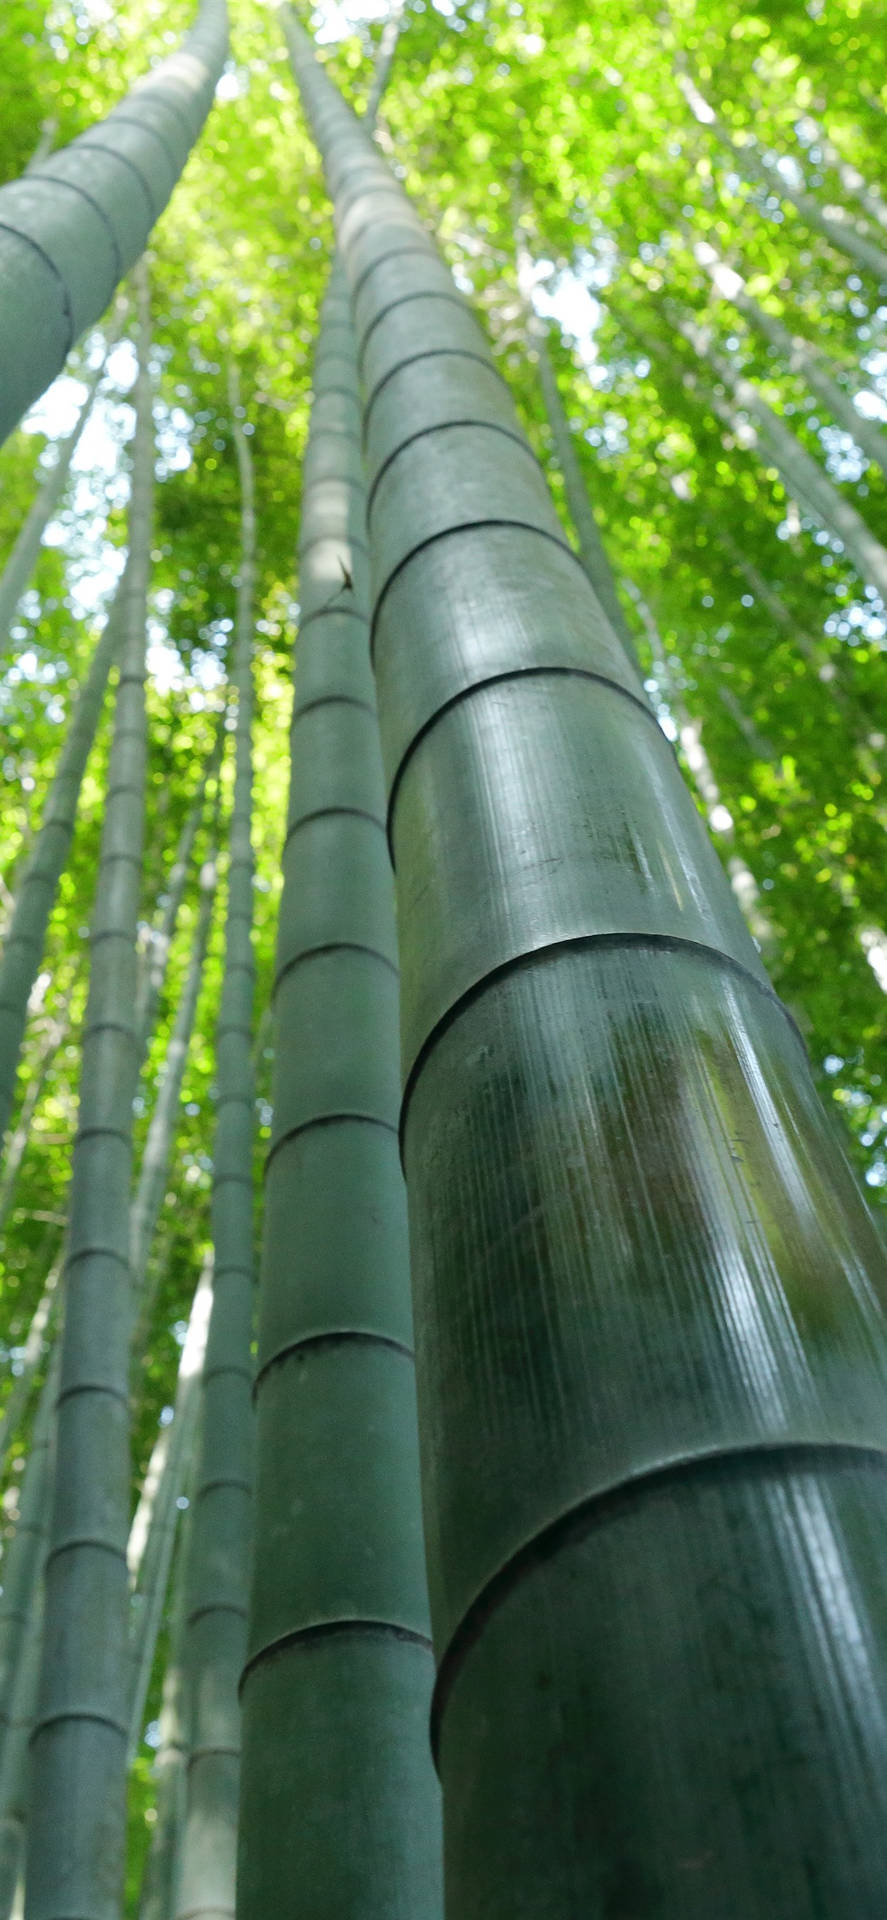 Caption: Close-up of Bamboo Texture for iPhone Wallpaper